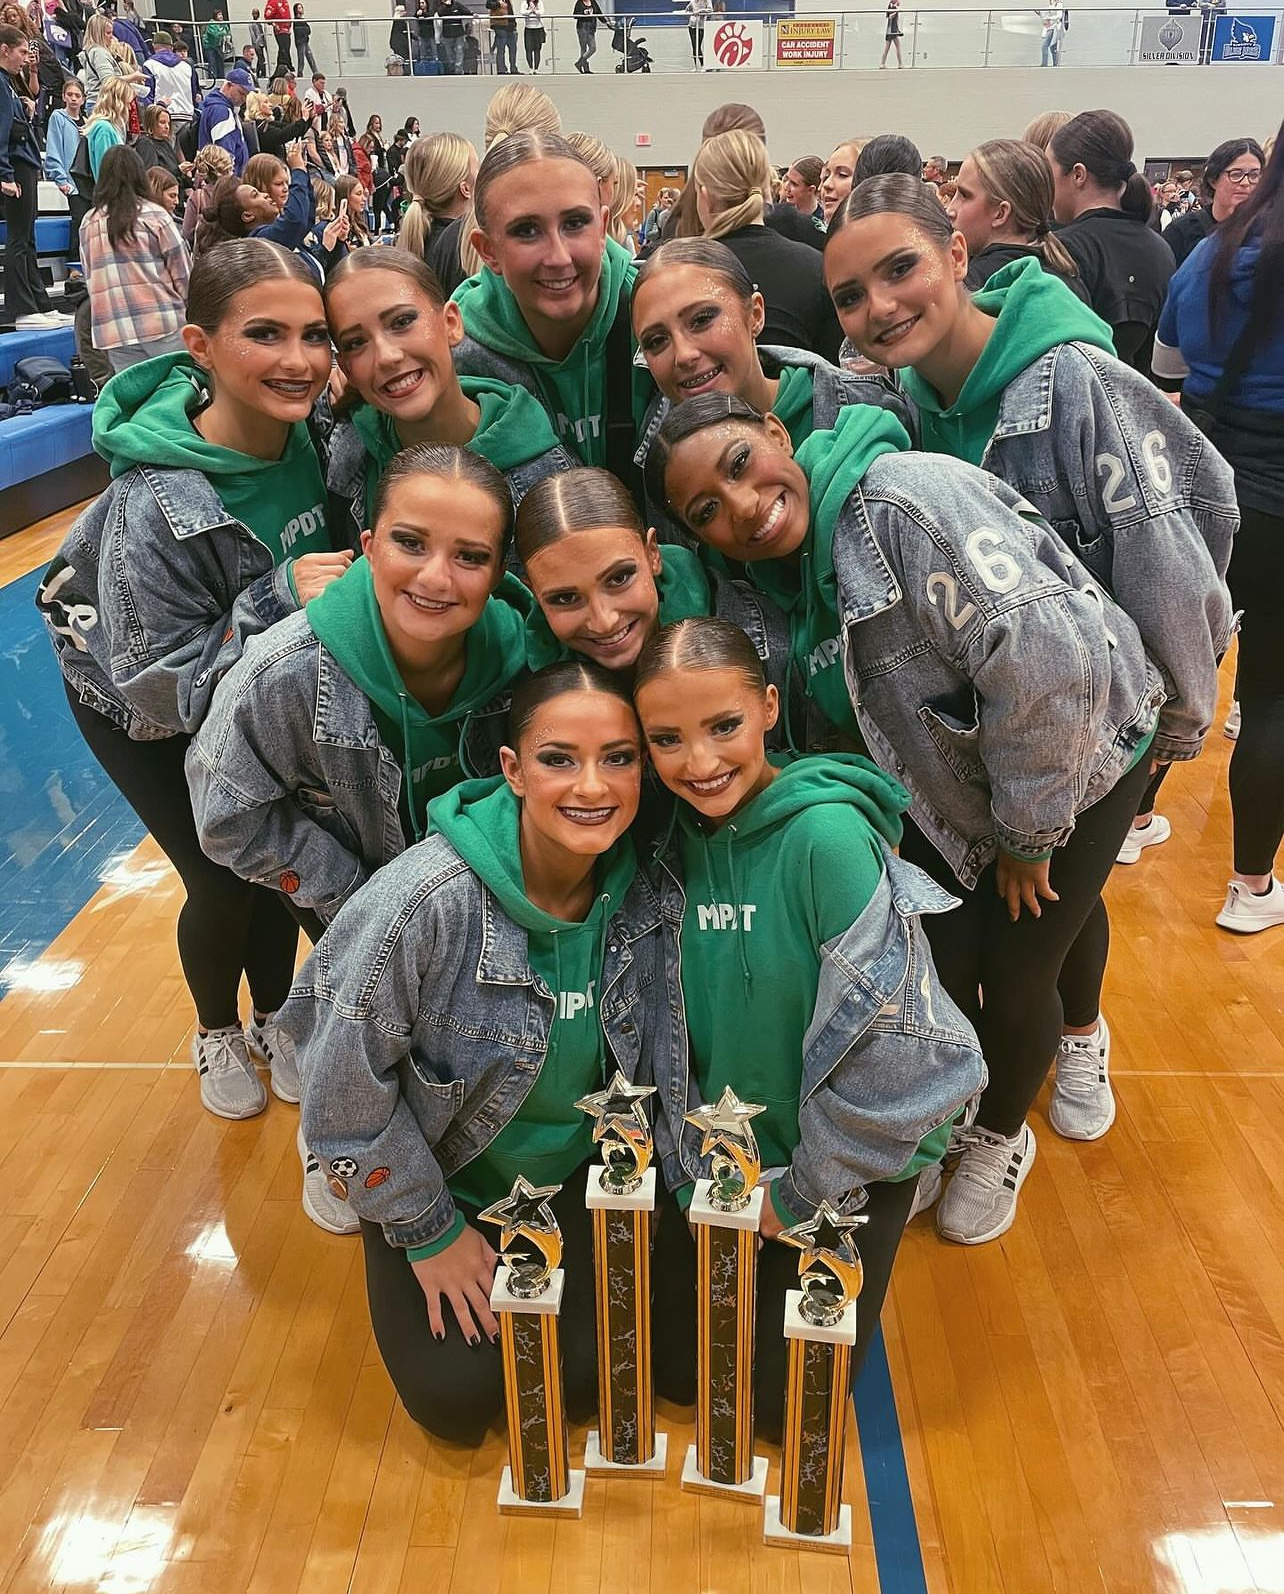 Mehlville Pantherettes getting a clean sweep at their first competition of the season.